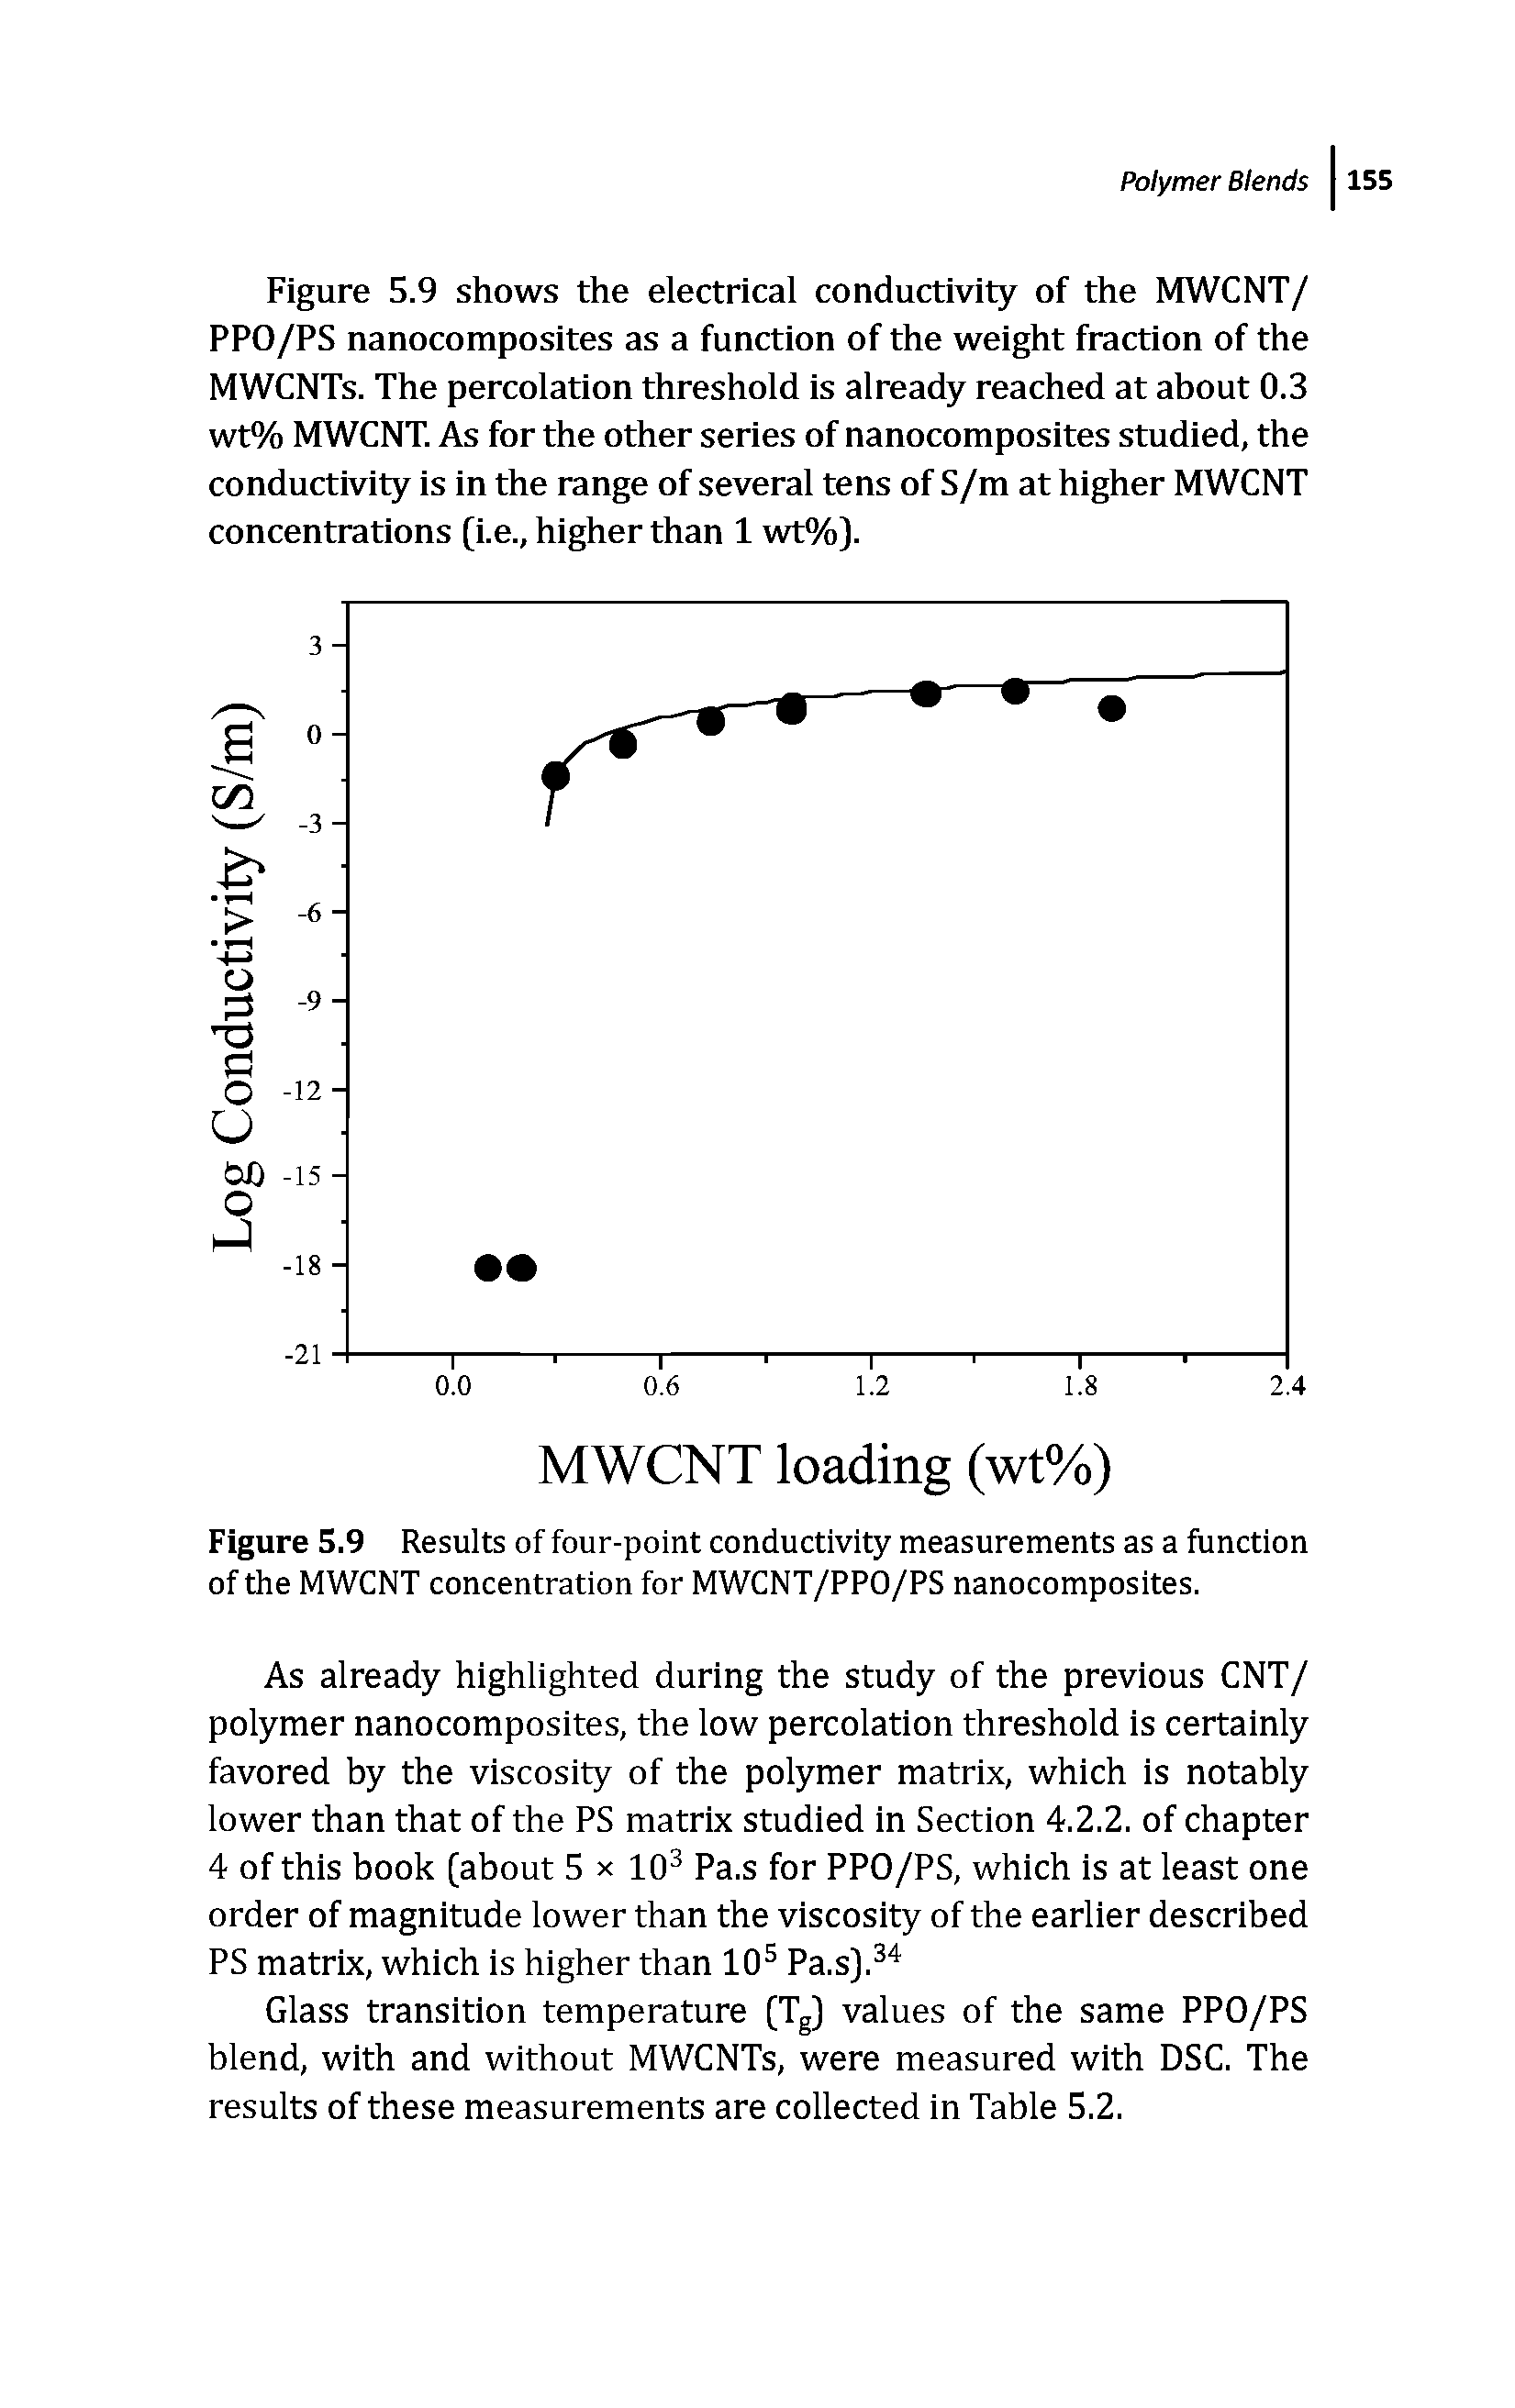 Figure 5.9 Results of four-point conductivity measurements as a function of the MWCNT concentration for MWCNT/PPO/PS nanocomposites.